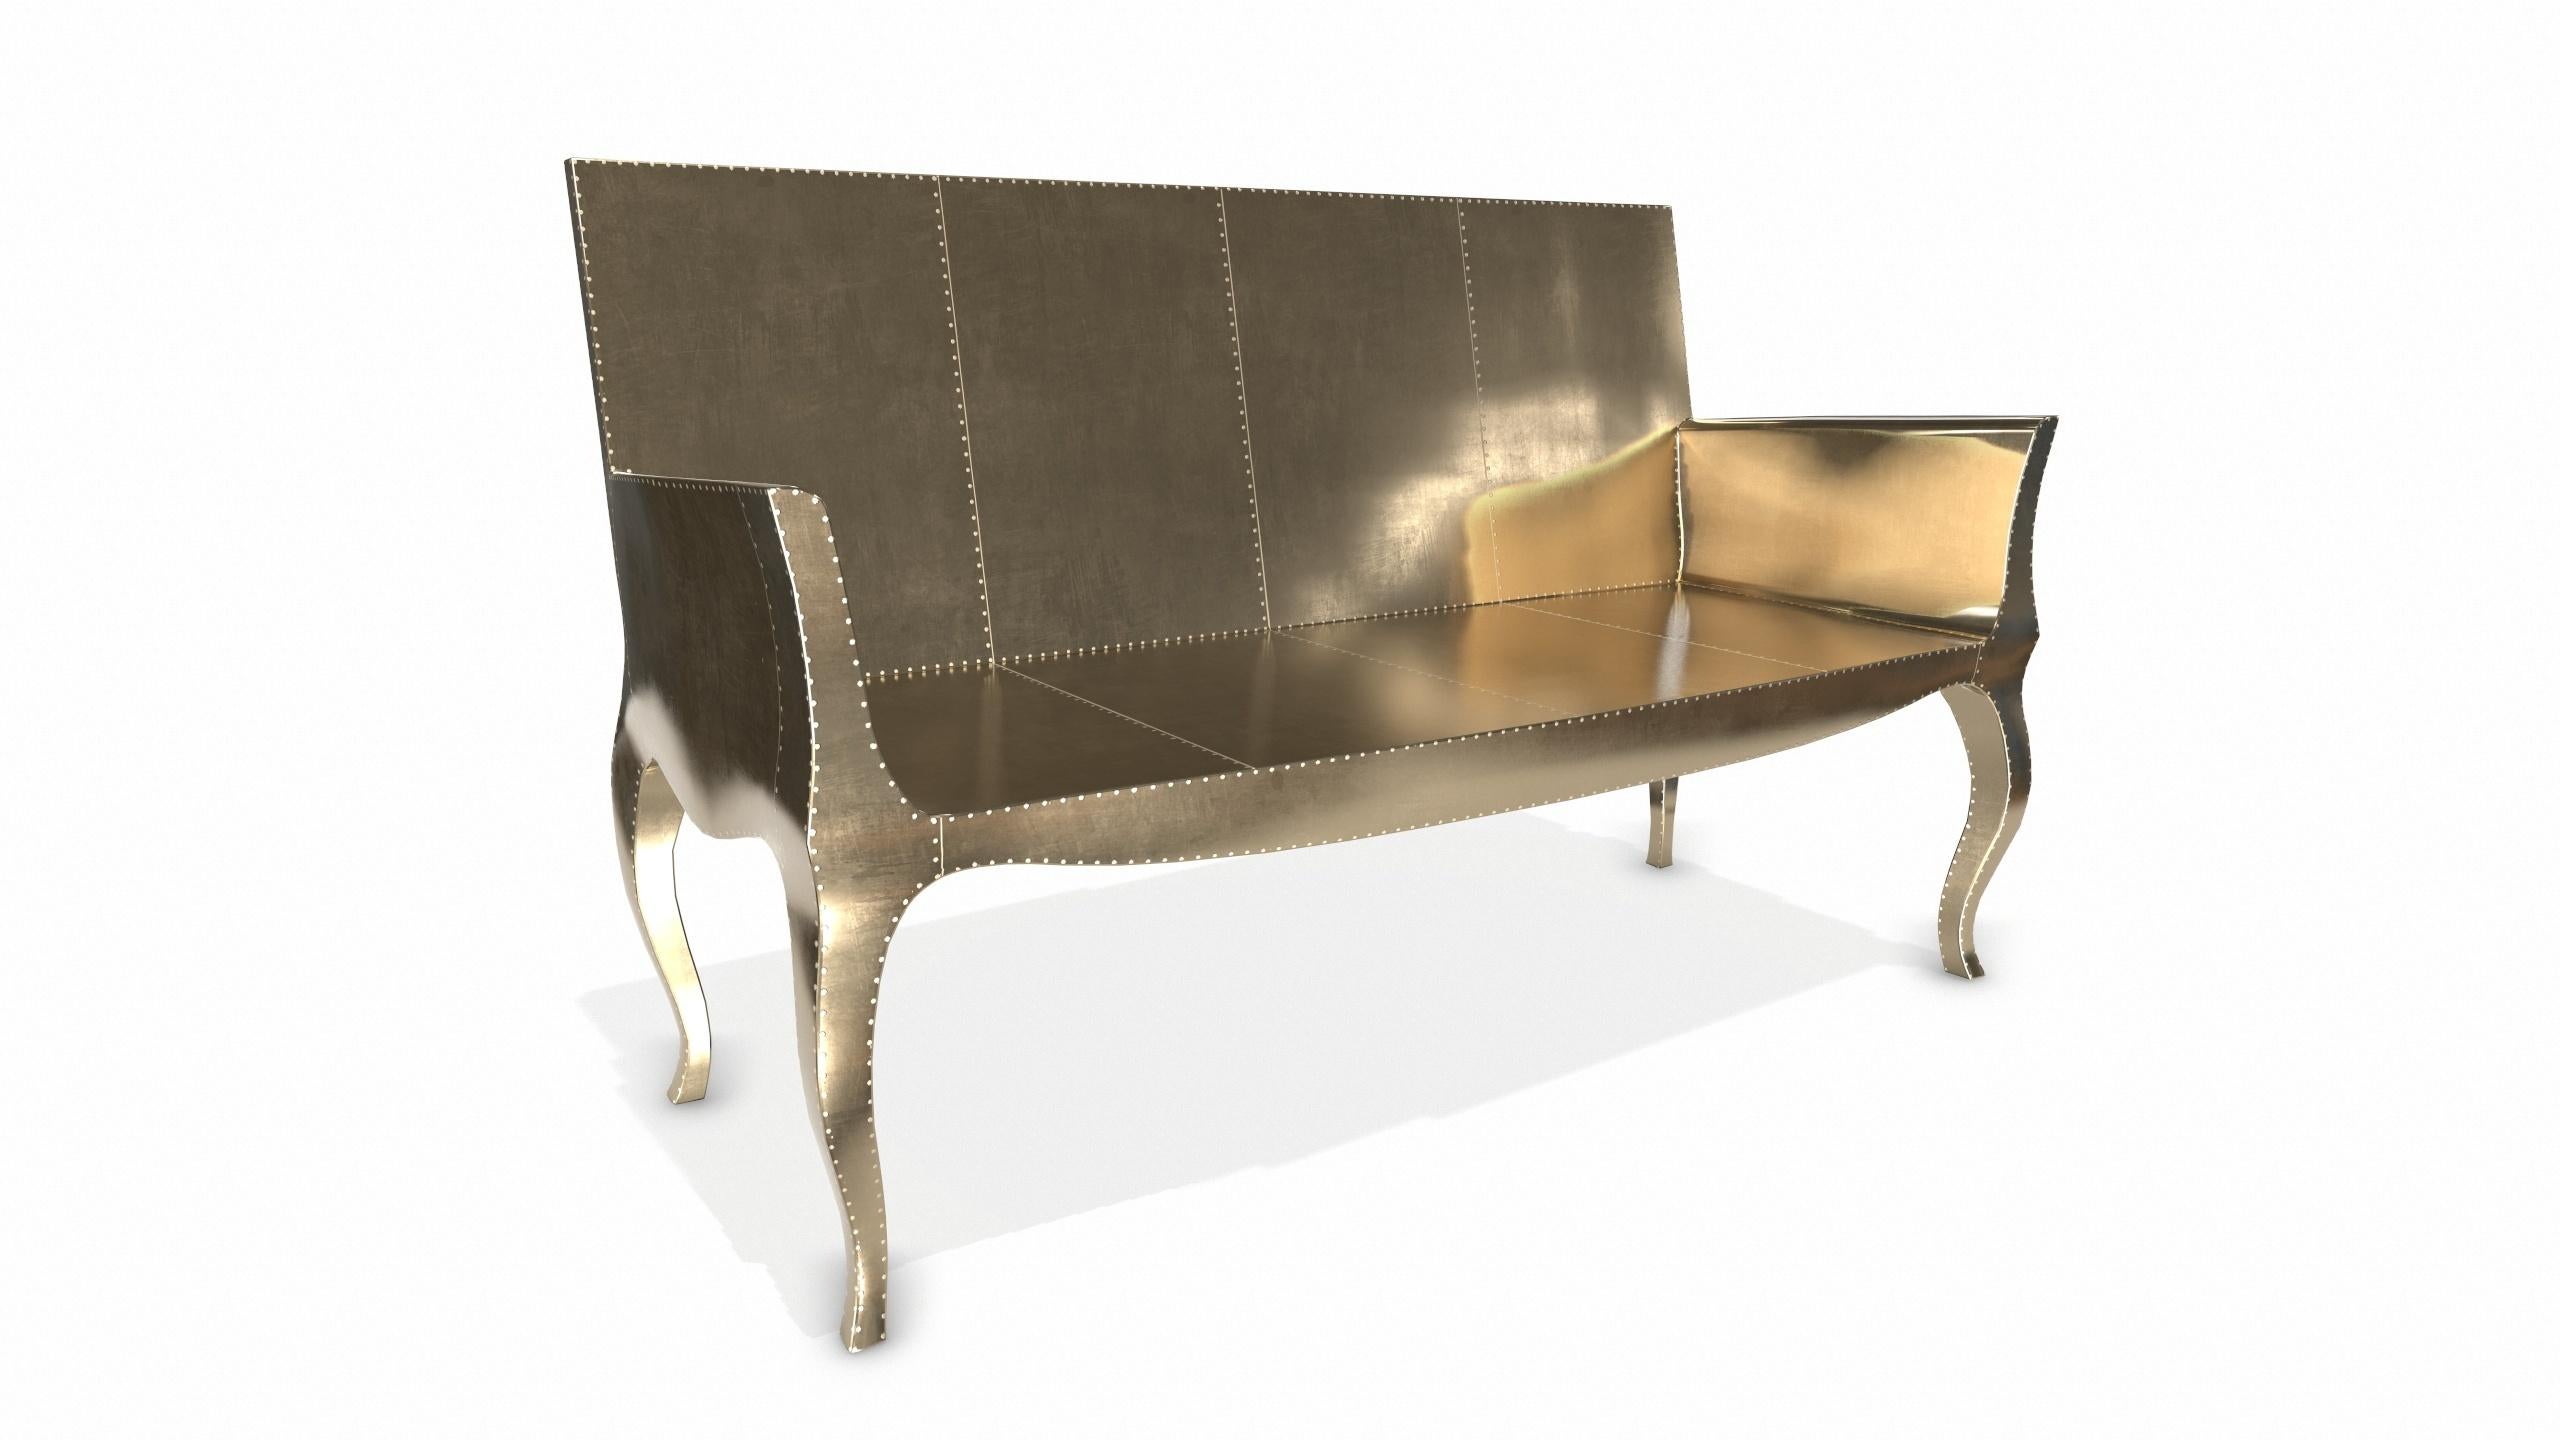 Contemporary Louise Settee Art Deco Canapes in Smooth Brass by Paul Mathieu for S Odegard For Sale